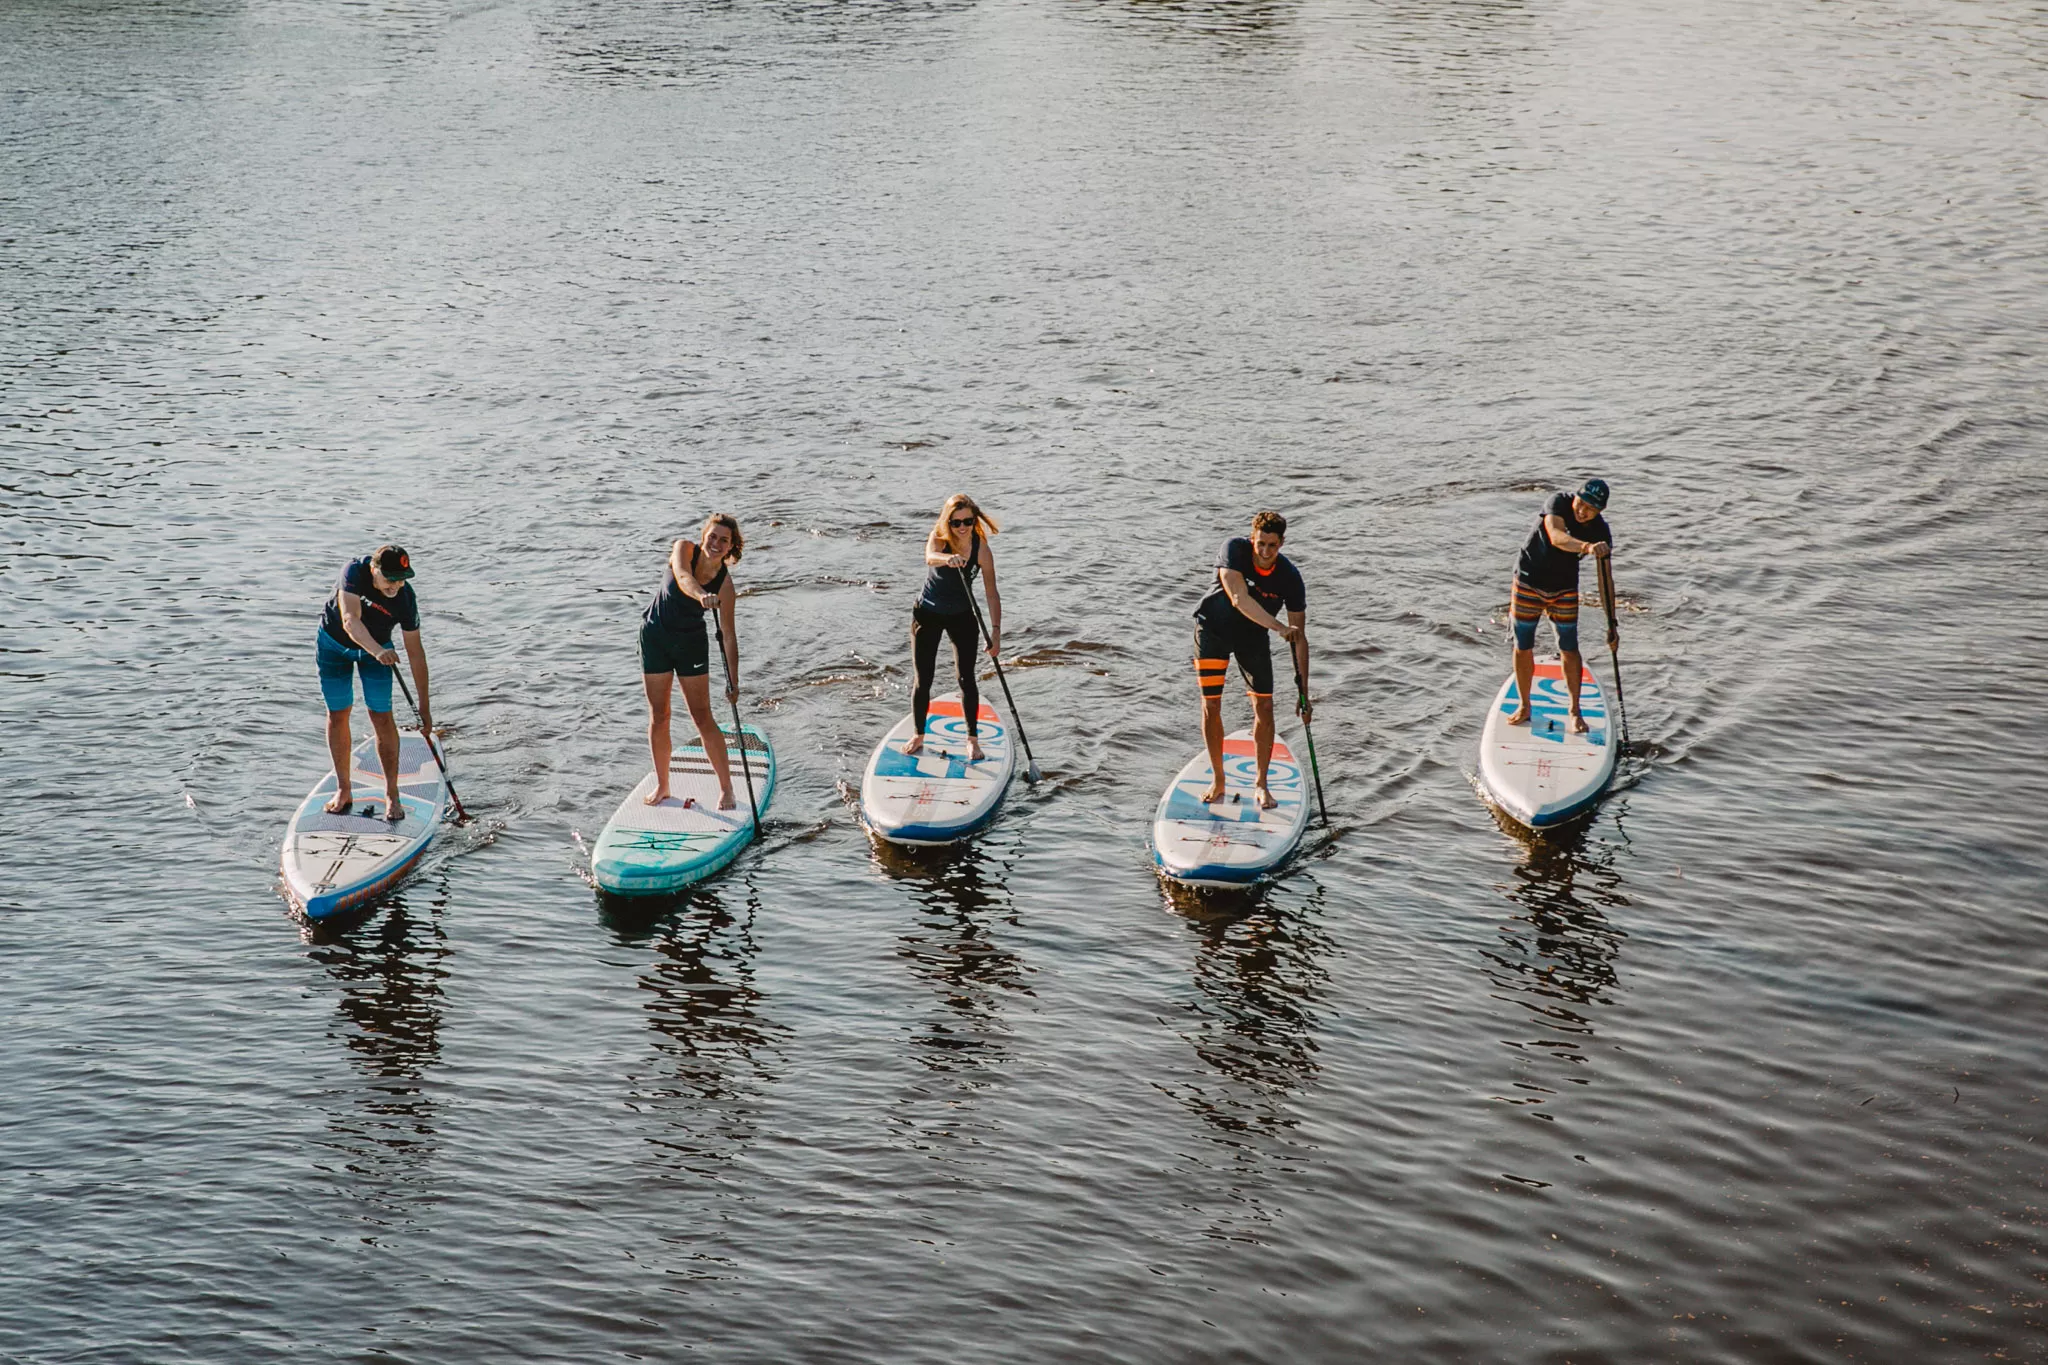 SUP Club Stade in Germany, Europe | Kayaking & Canoeing - Rated 1